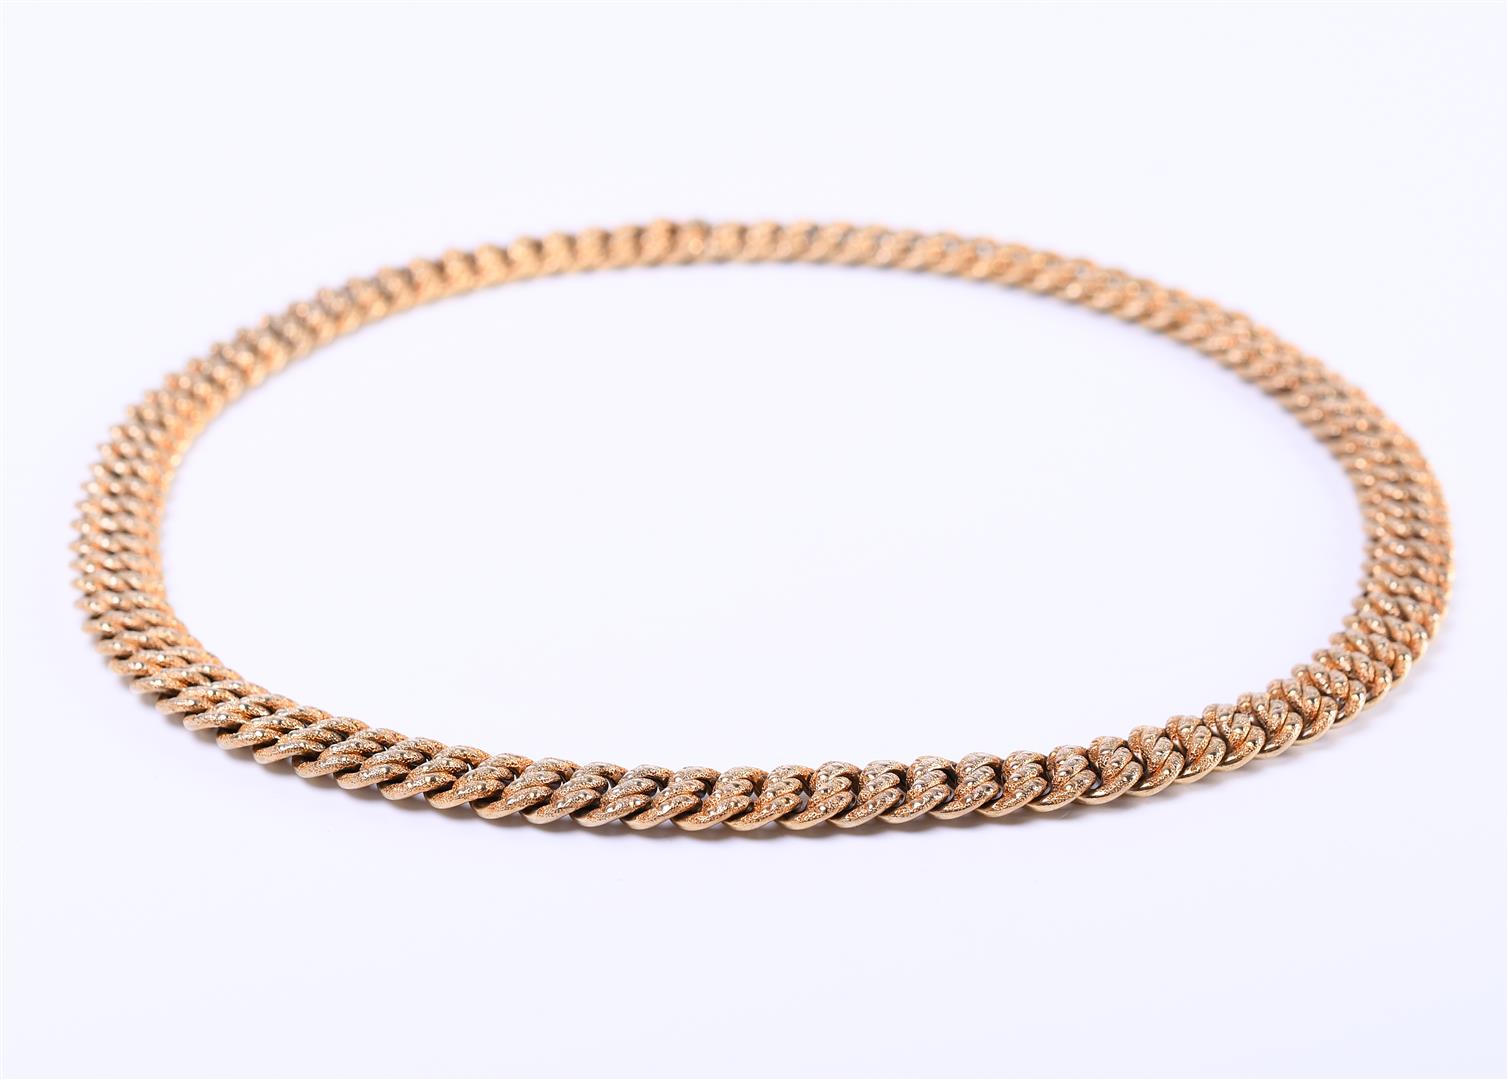 14 kt yellow gold braided gourmet necklace